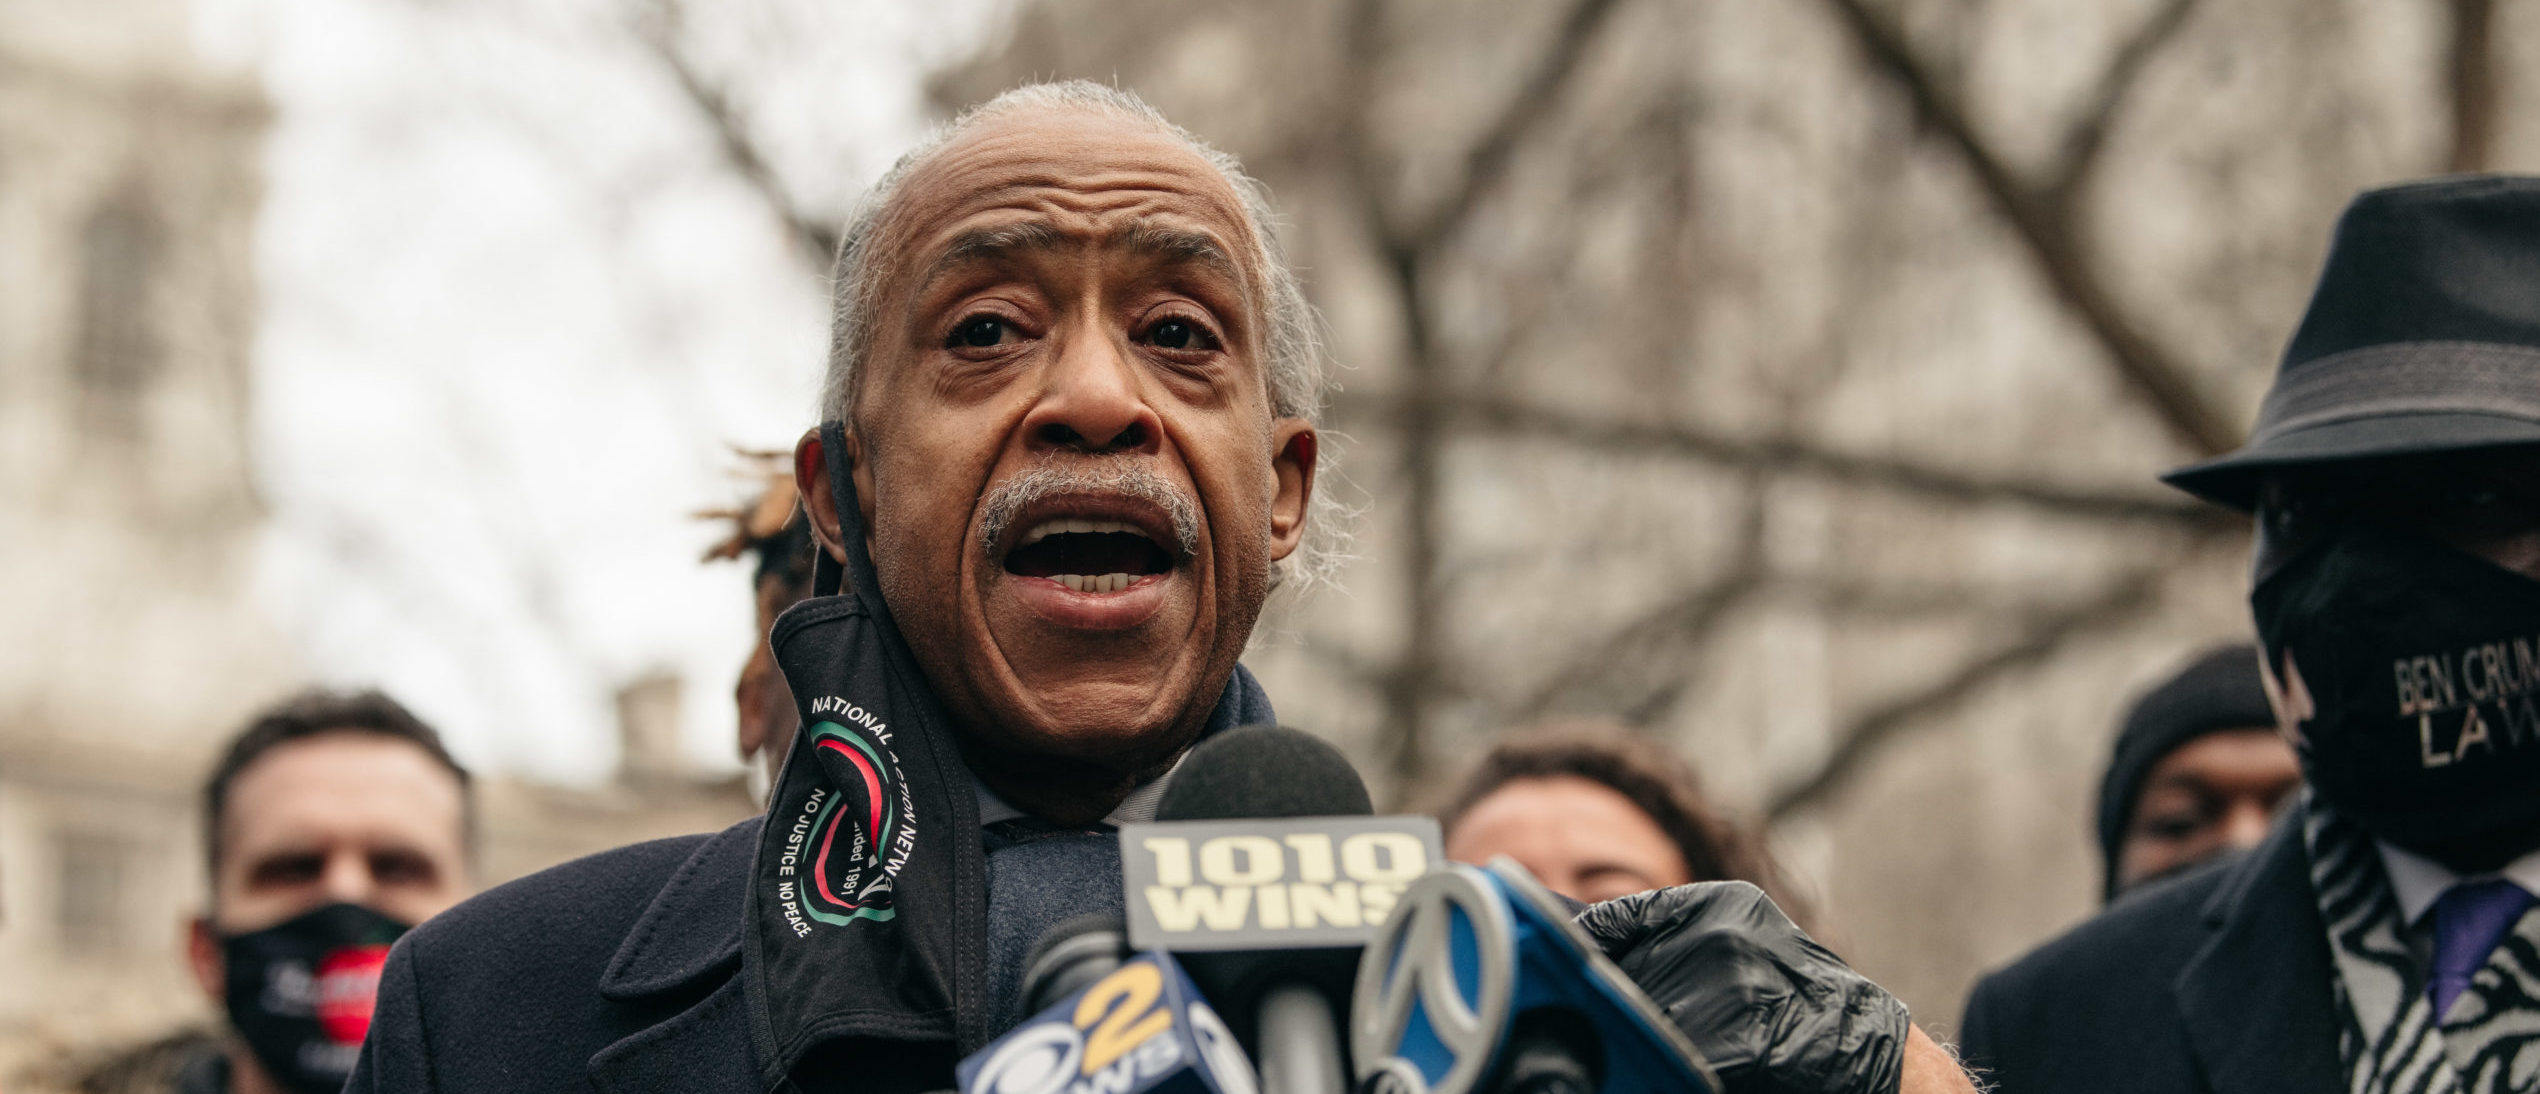 NEW YORK, NY - DECEMBER 30: Reverend Al Sharpton speaks at a press conference held by the family of Keyon Harrold Jr in lower Manhattan on December 30, 2020 in New York City. After Harrold Jr's father shared video footage of a white woman assaulting him and wrongfully accusing him of stealing her phone in a Manhattan hotel lobby, civil rights leaders have called for an end to persistent racial profiling and injustice. (Photo by Scott Heins/Getty Images)